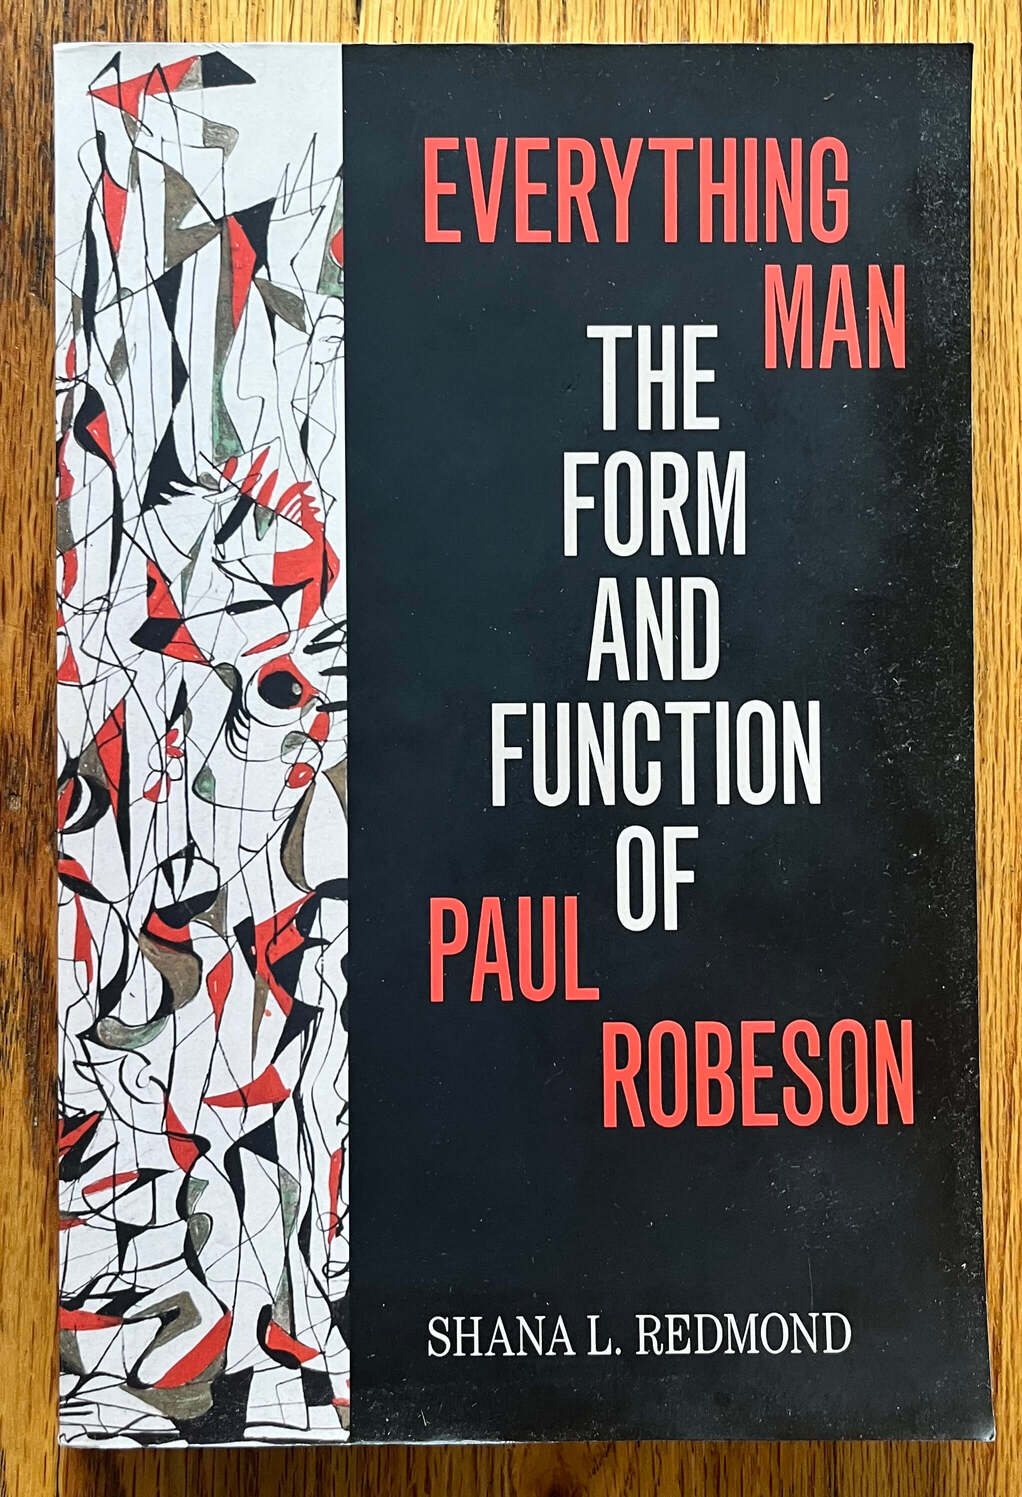 “Everything Man: The Form and Function of Paul Robeson” by Shana L. Redmond.